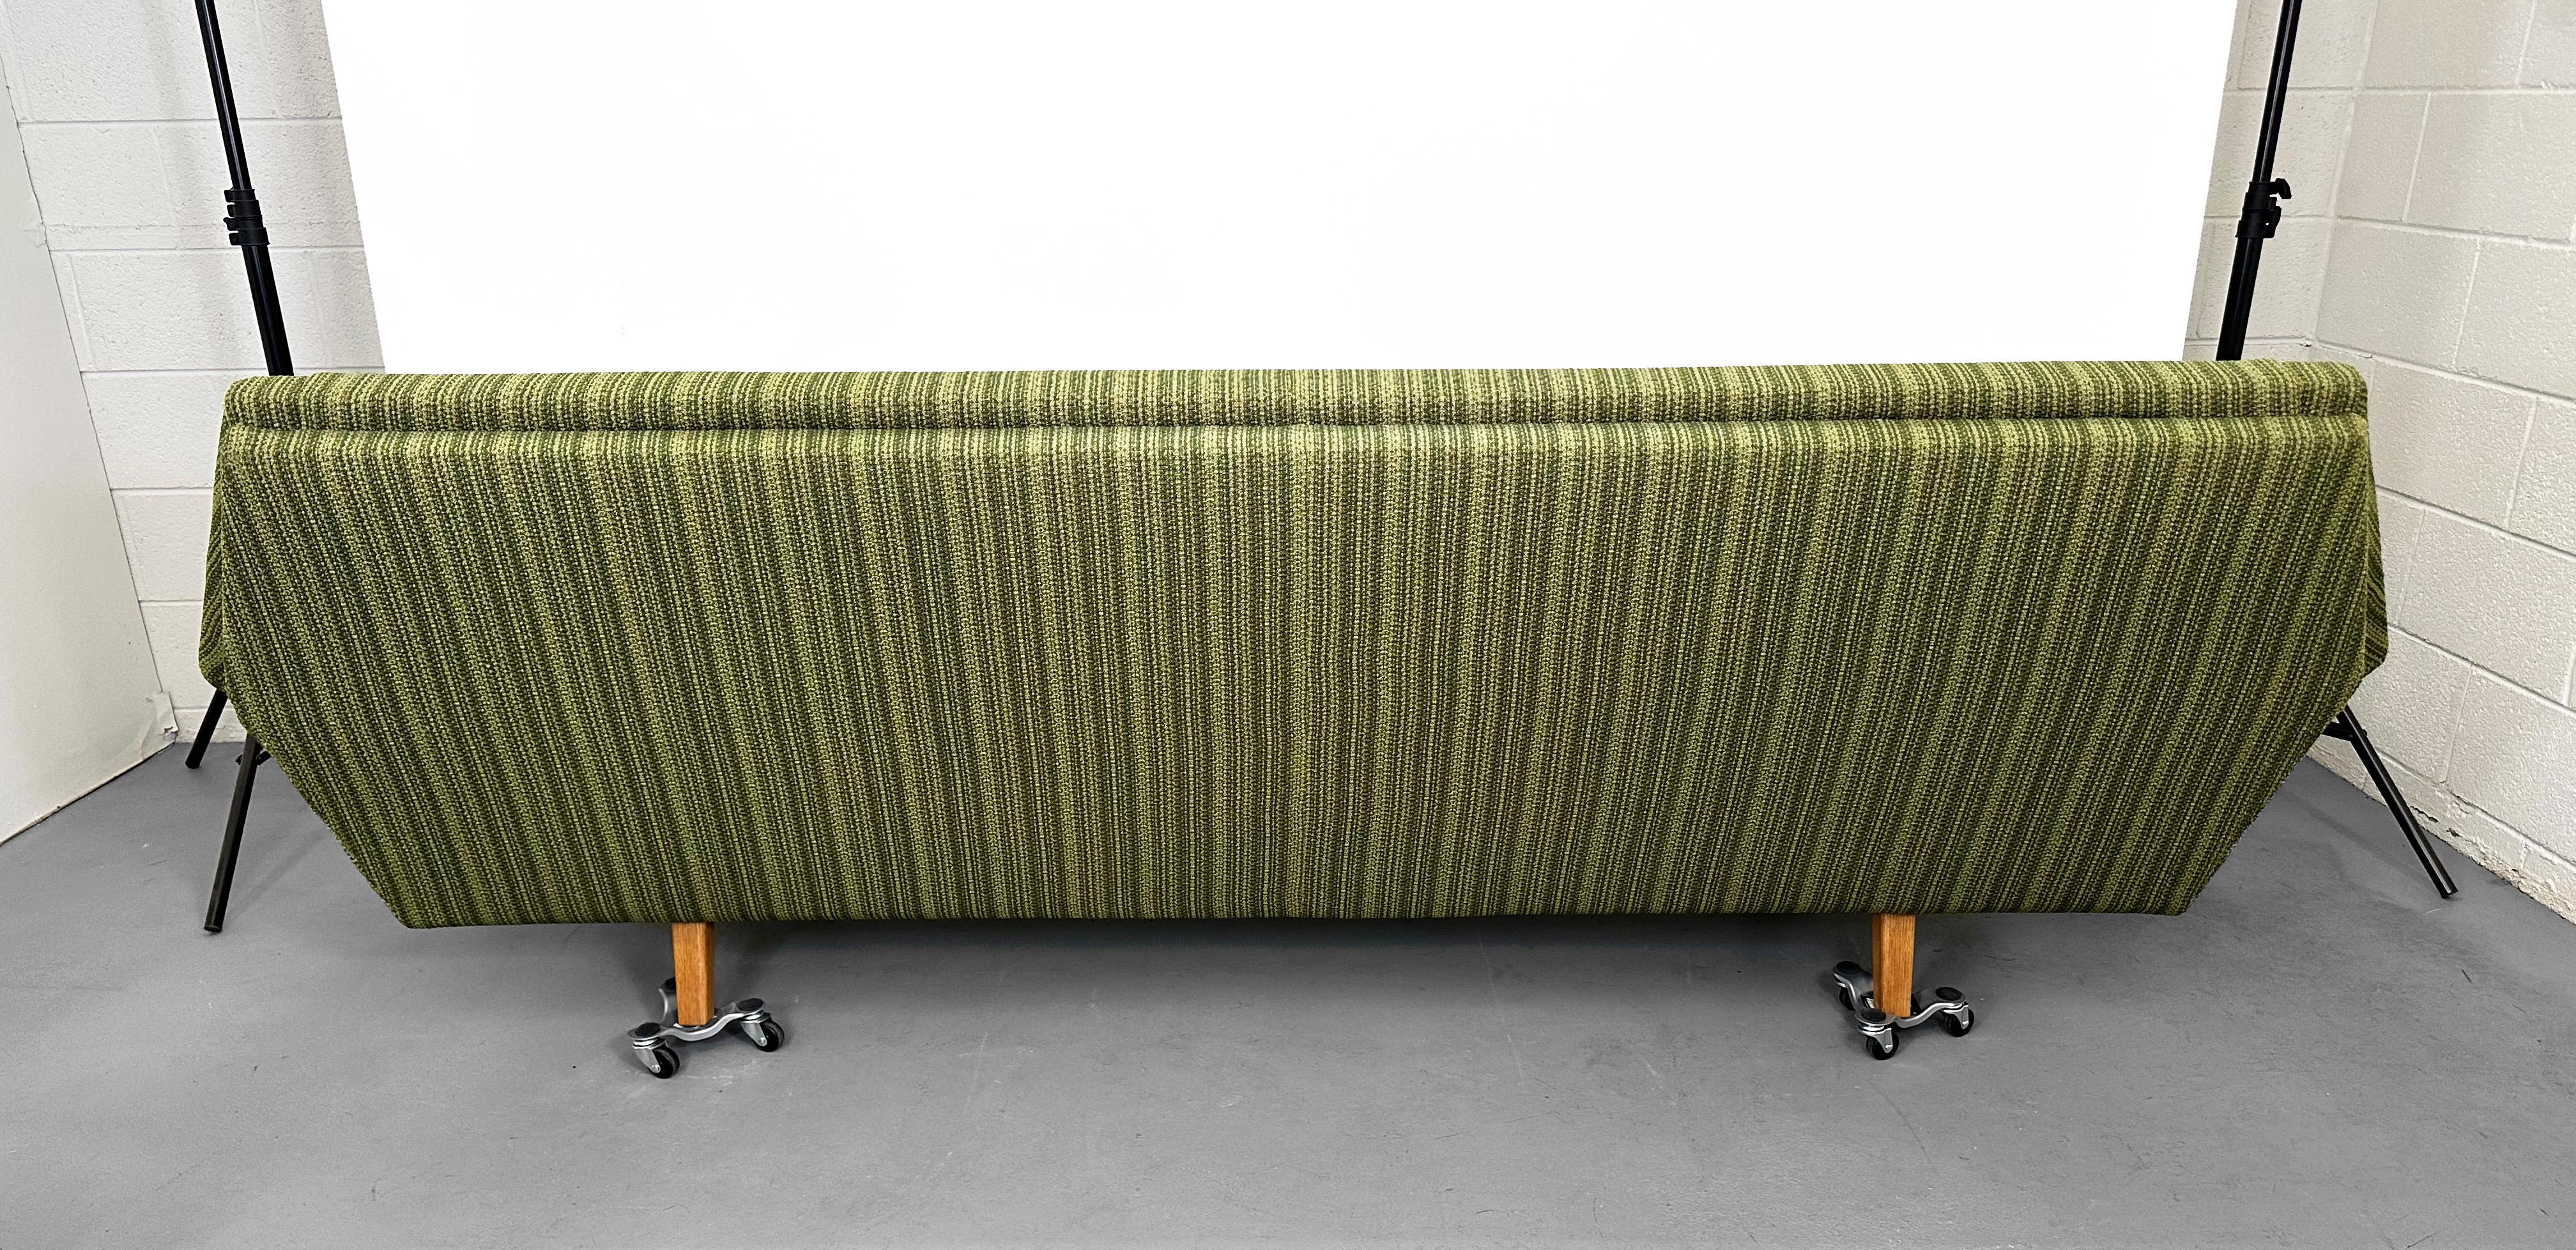 Mid-20th Century Ikea Sofa by Bengt Ruda, Early 1960s For Sale